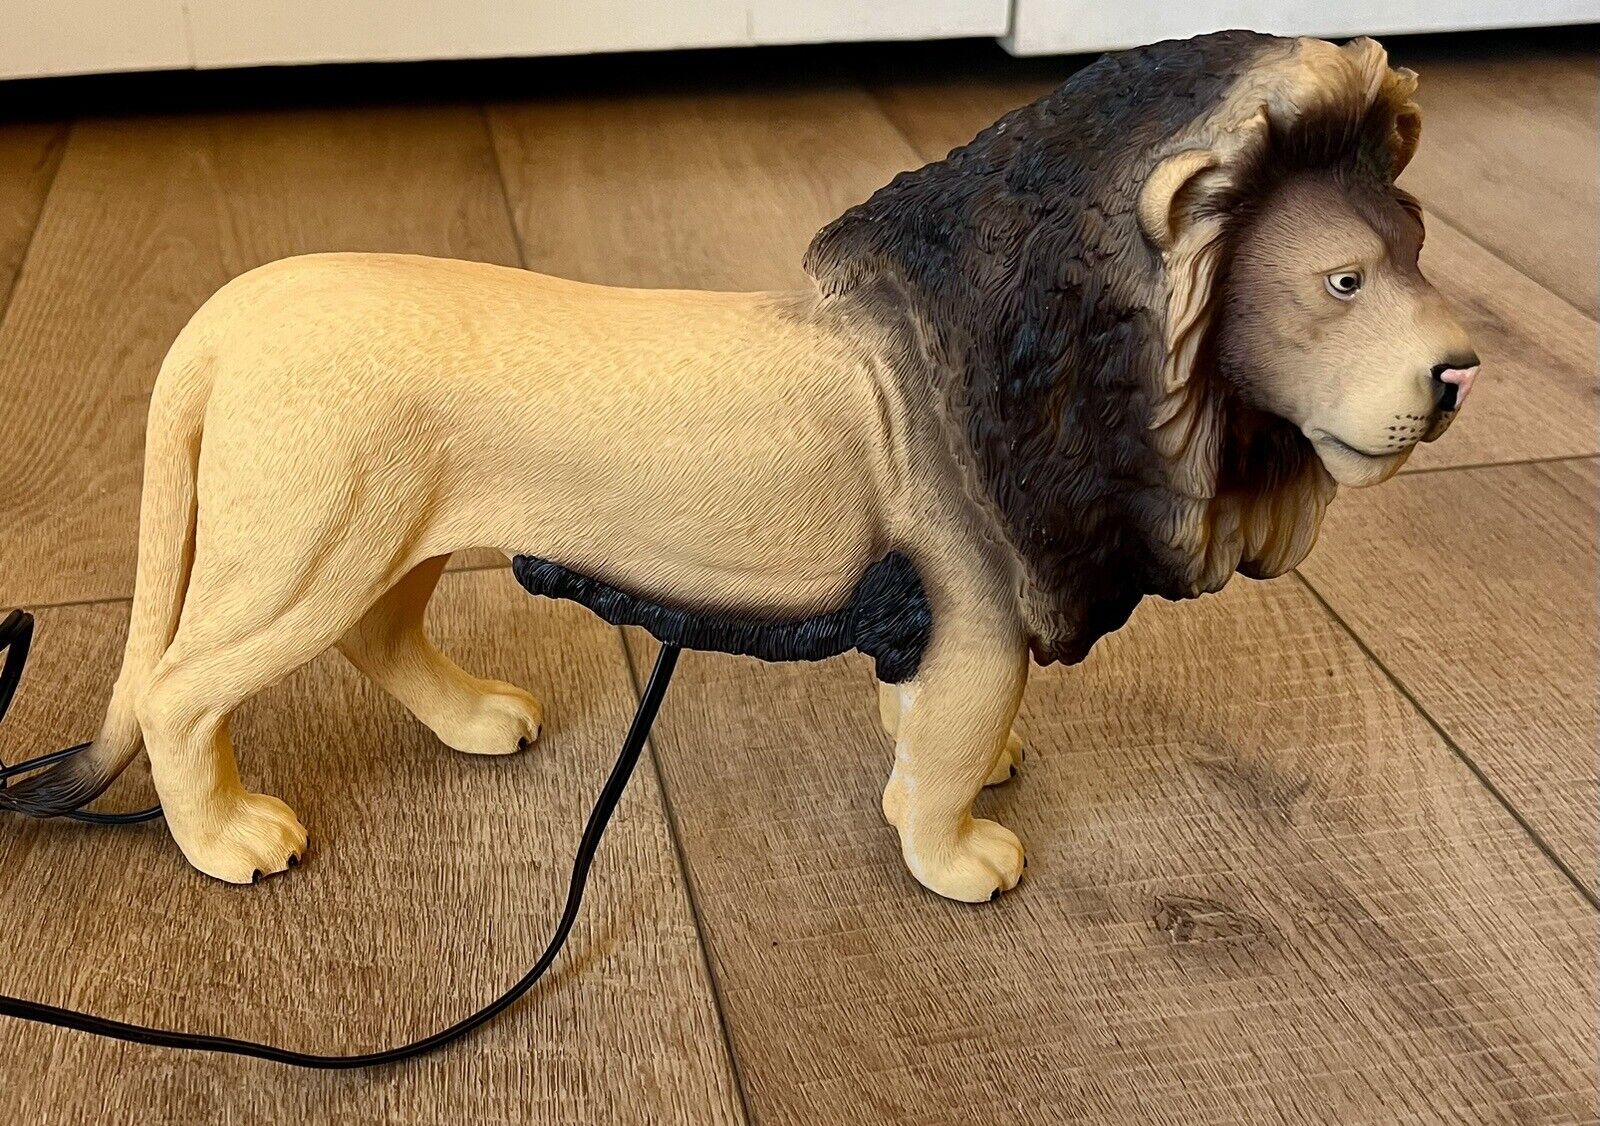 Lion Table Lamp Thick Acrylic Plug In Lights Up Molded Figure Male